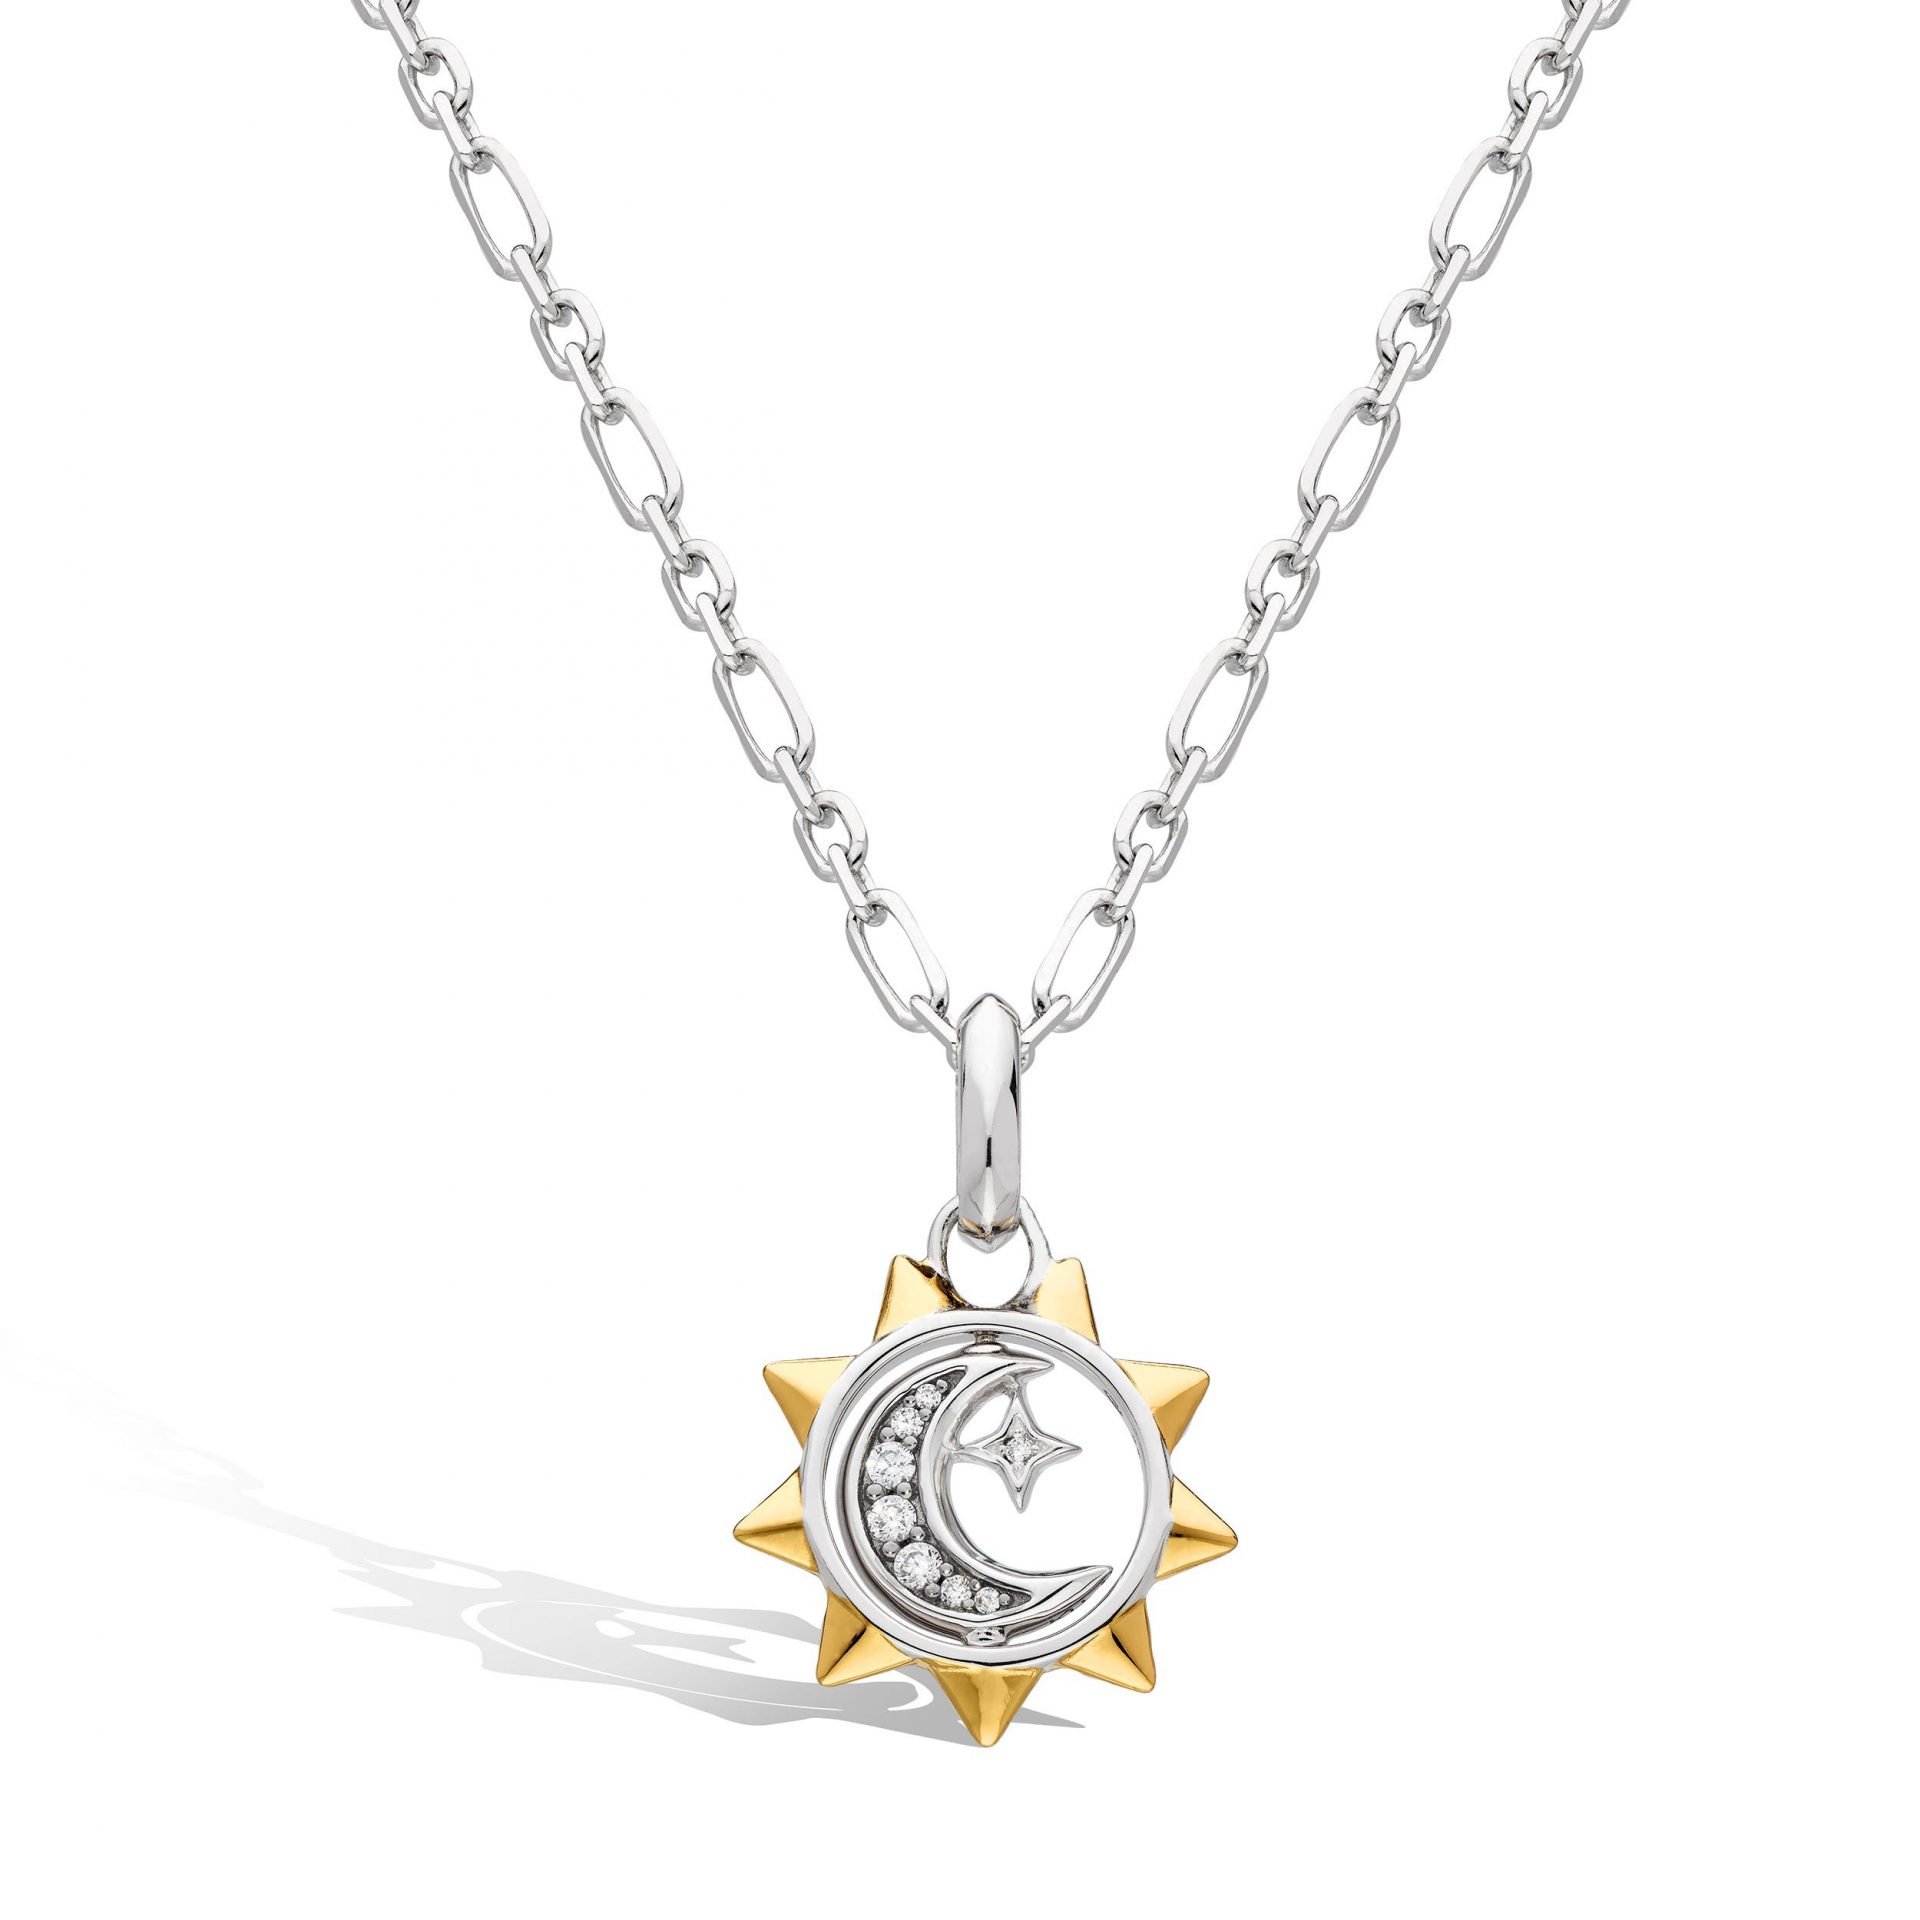 Buy Dainty Sun Moon Star Necklace, Gold Necklace, 925 Sterling Silver  Necklace, Minimalist Sun Necklace, Everyday Necklace, Delicate Necklace  Online in India - Etsy